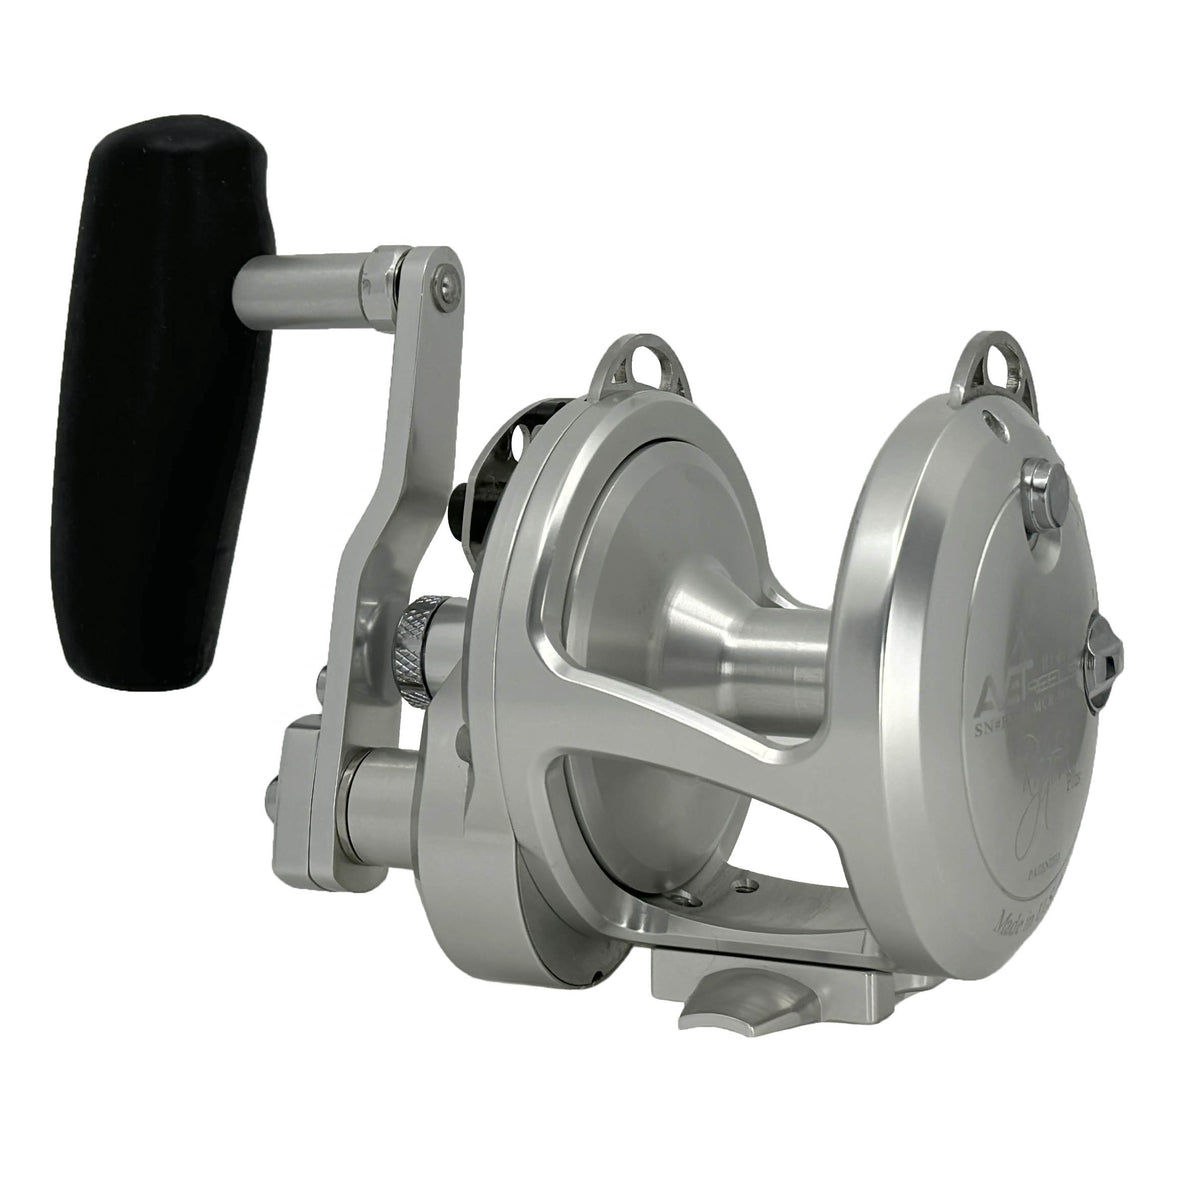 JAWS cover size L for Accurate 600W Avet HXW 5/2 Daiwa 50 Shimano TN50 reel  Blue